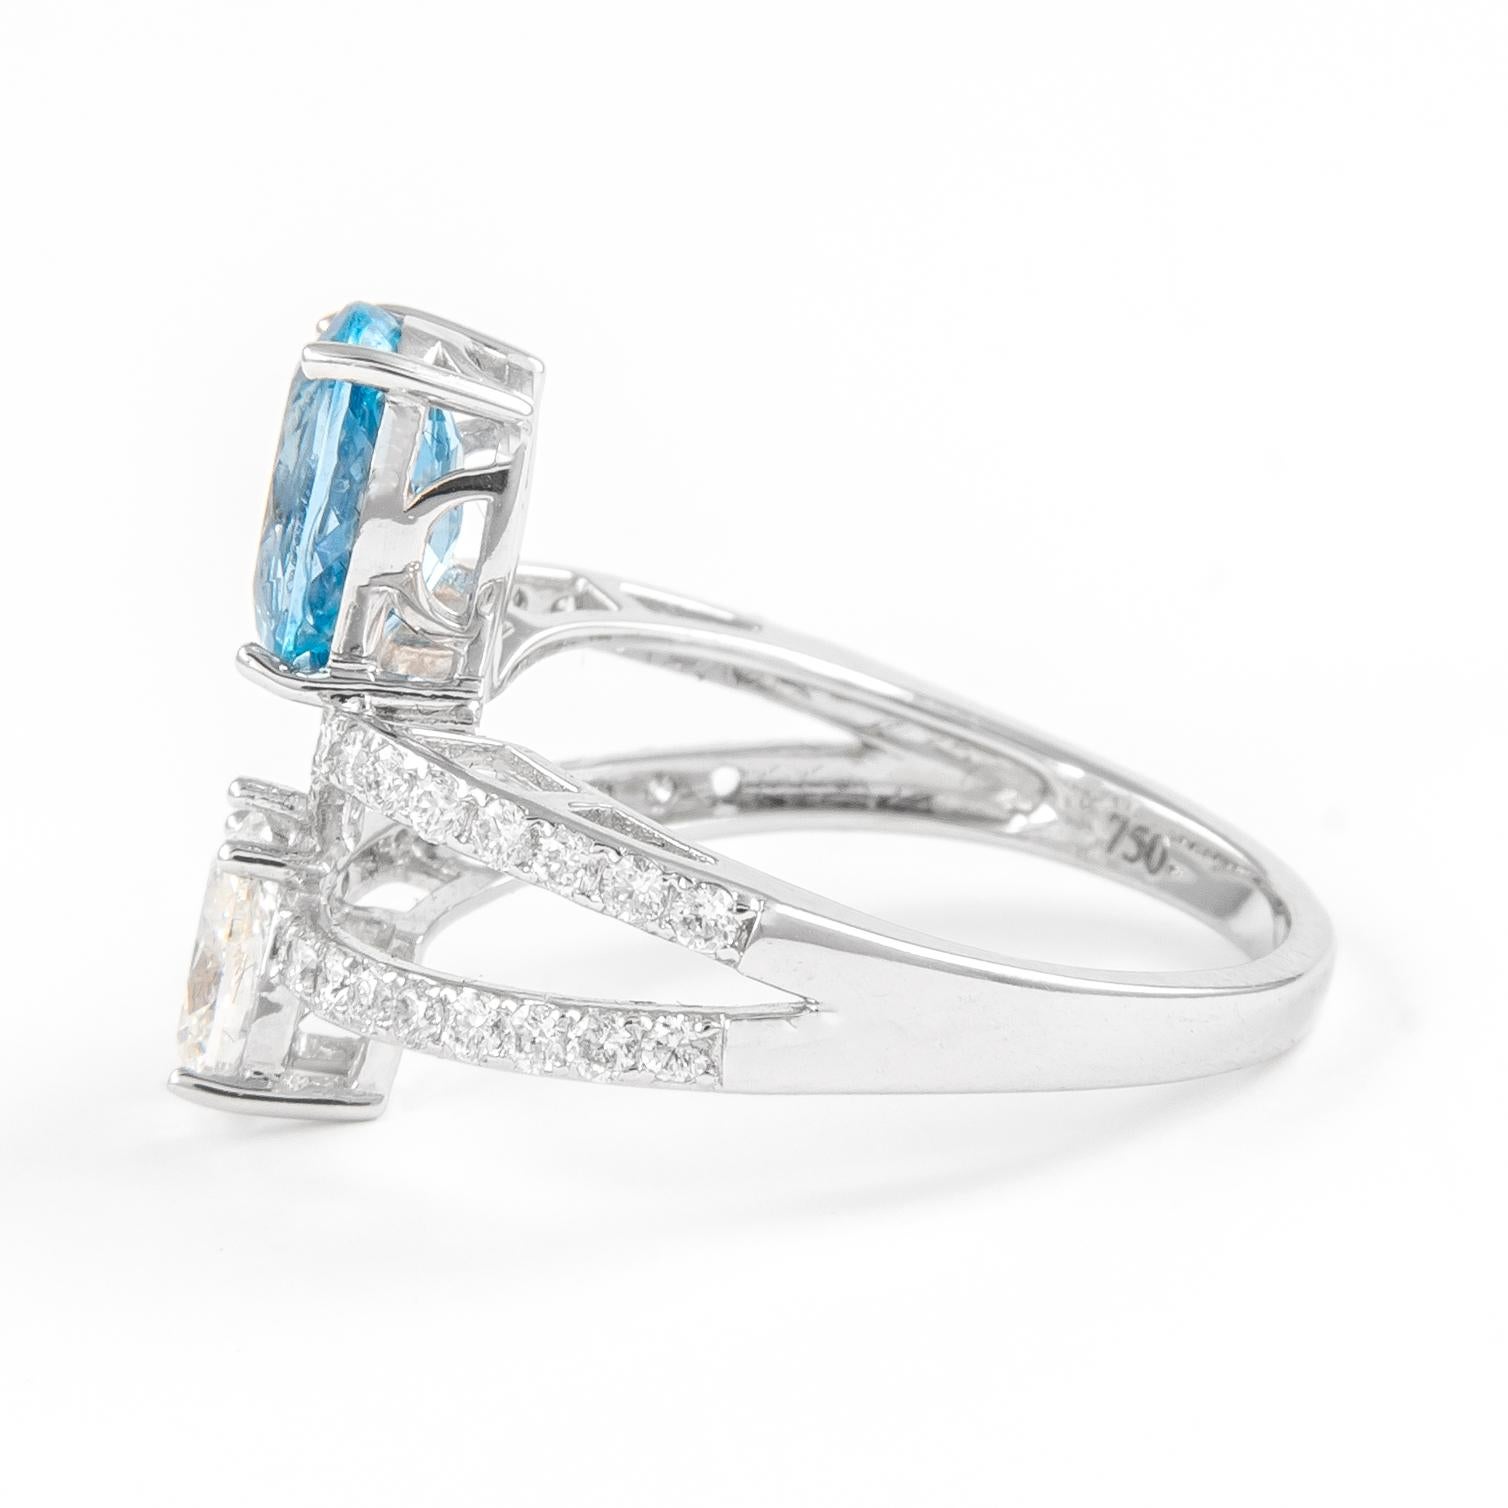 Contemporary Alexander 1.81 Carat Oval Aquamarine and Pear Diamond Ring 18k White Gold